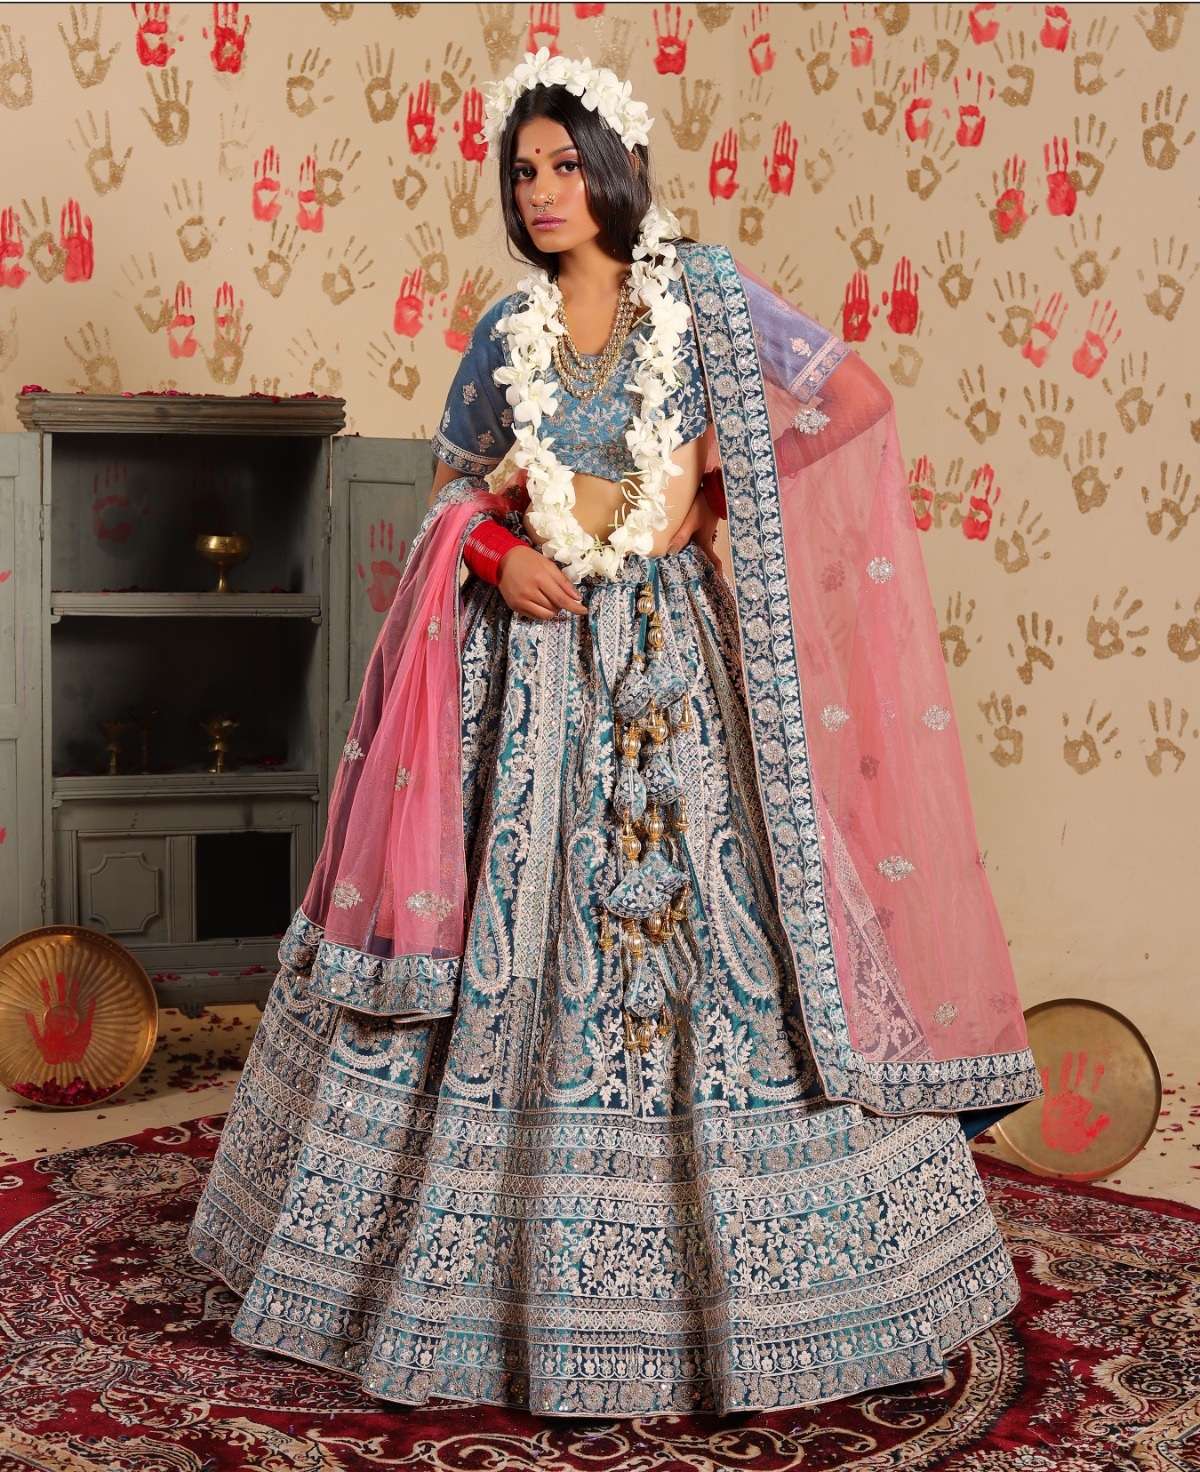 These Light Colored Bridal Lehengas Will Make You Ditch Reds & Pinks! |  Indian bridal lehenga, Indian bridal dress, Bridal lehenga red